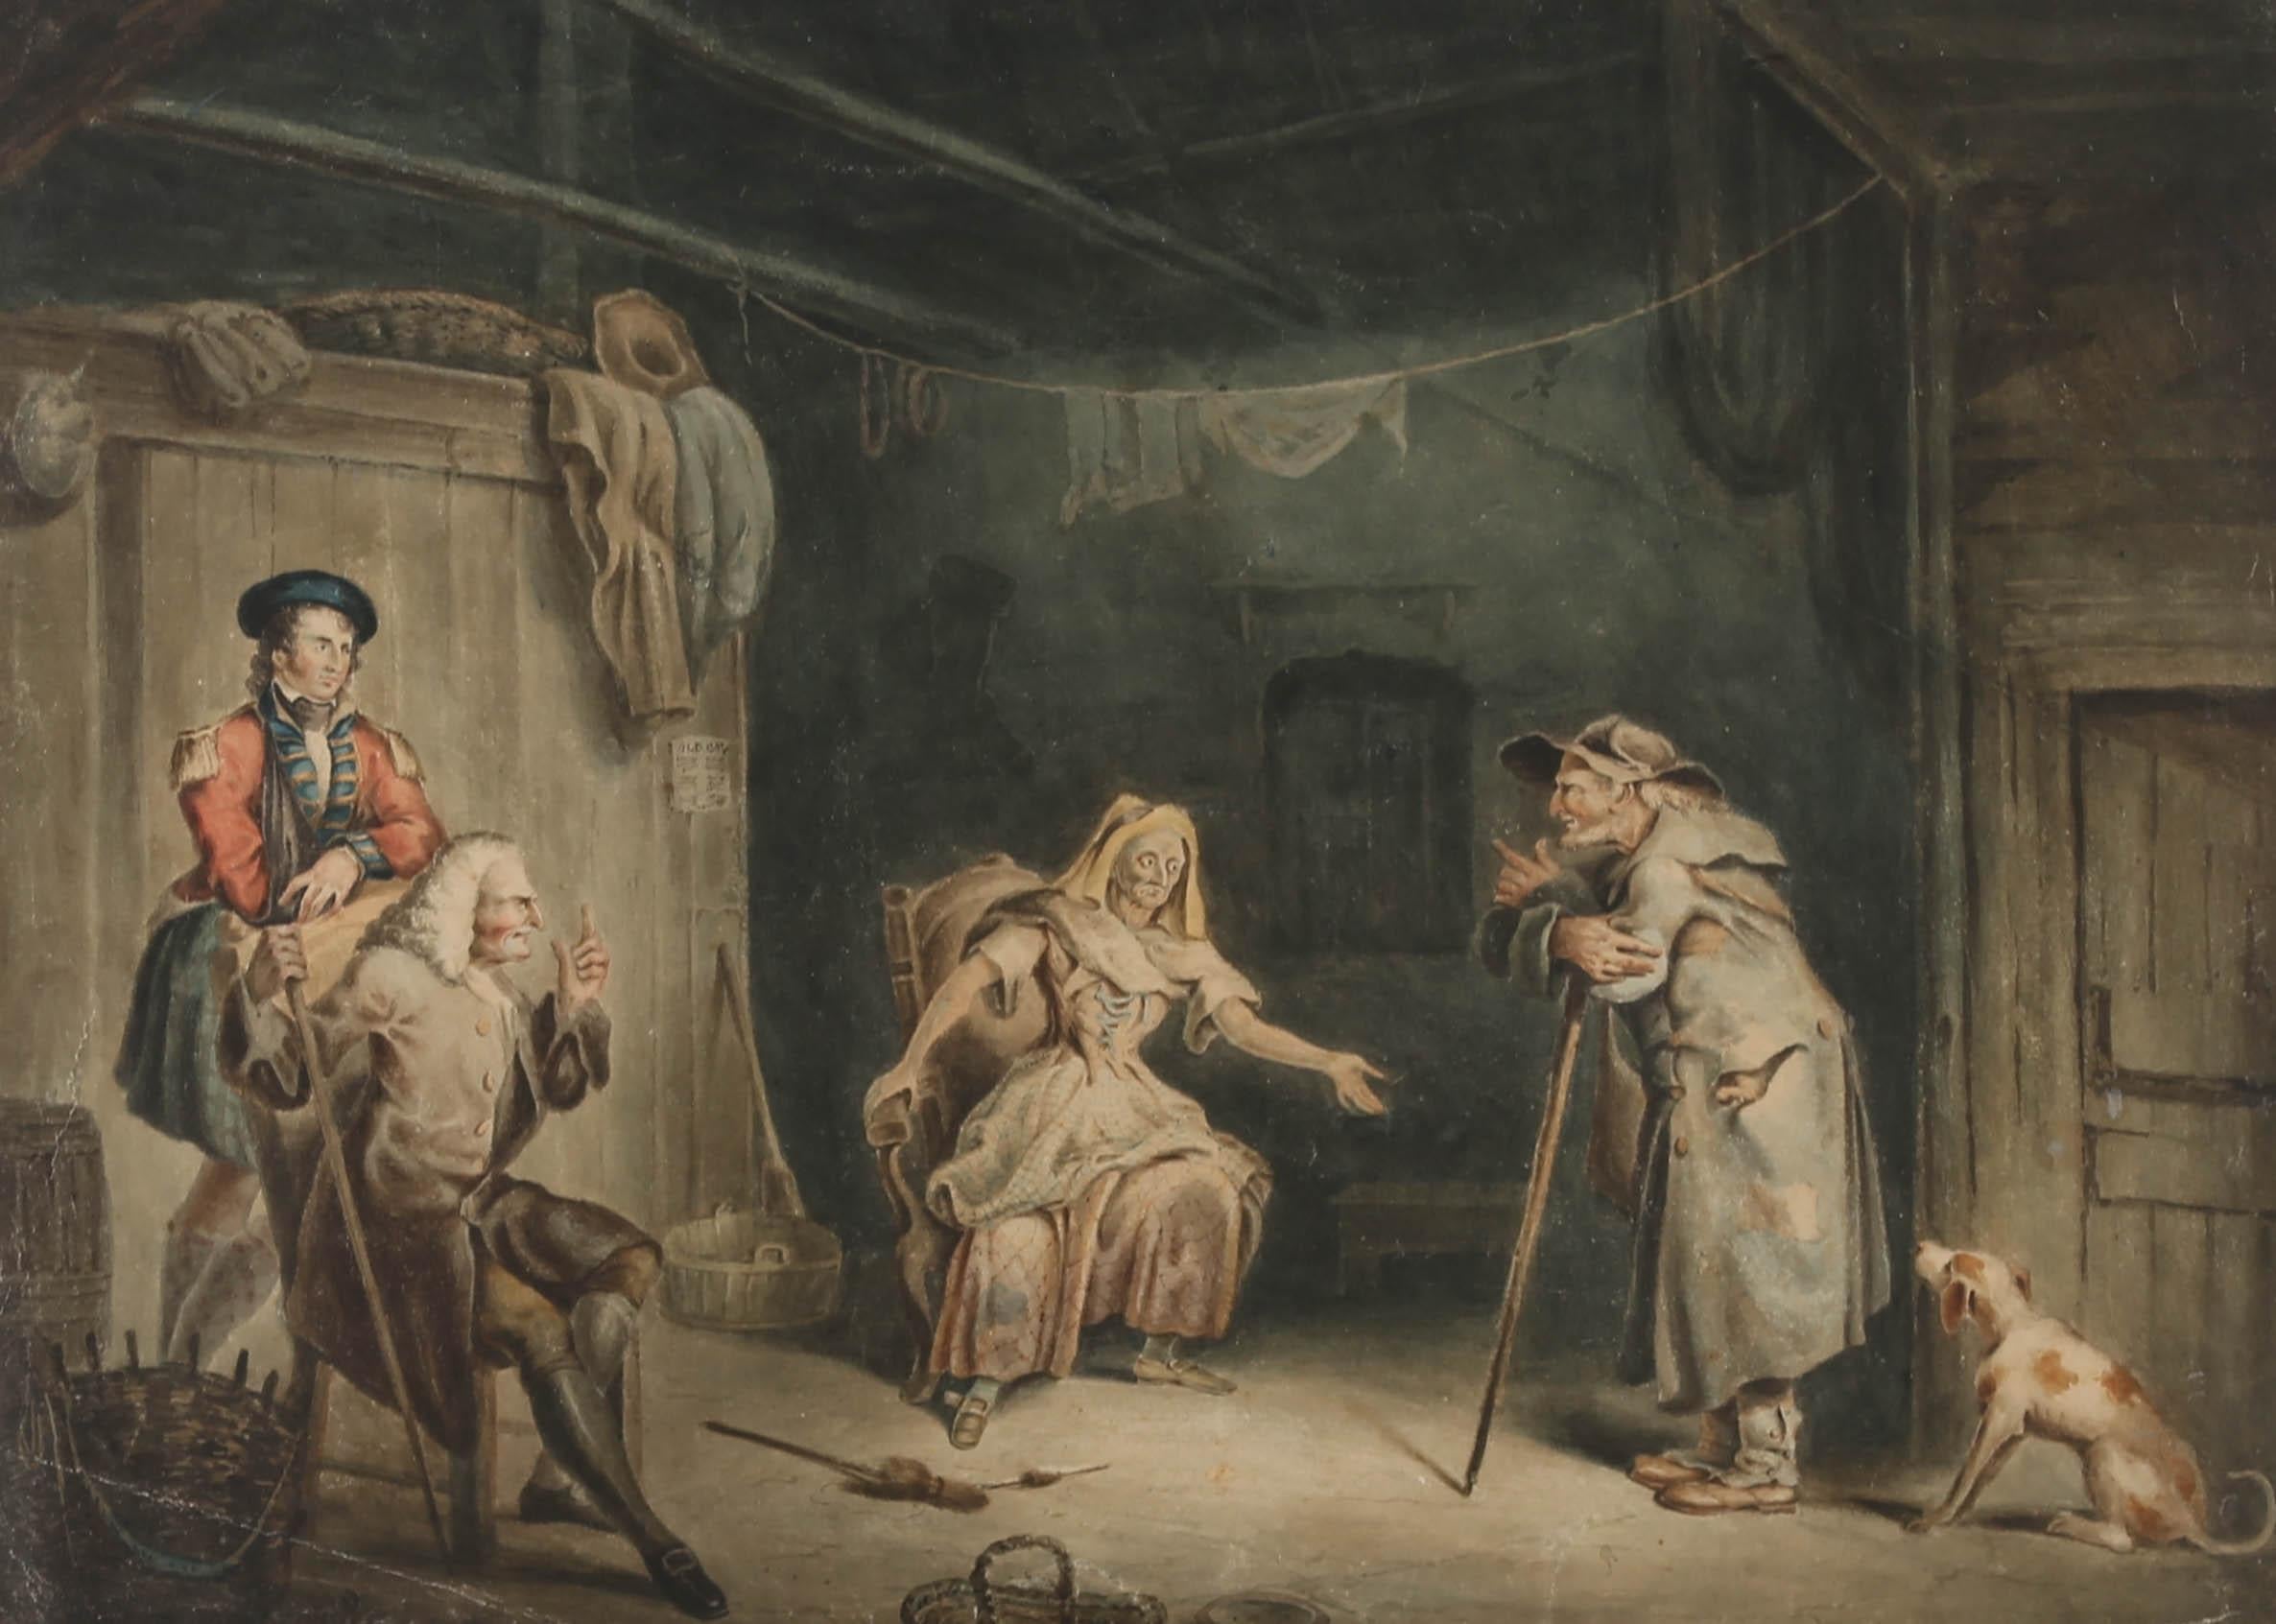 A fine mid 19th Century watercolour scene with wonderful narrative. The scene is set inside a run down barn in which an old man and woman appear to be living with their dog. A finely dressed Scotsman, in kilt and tam o' shanter stands, leabning on